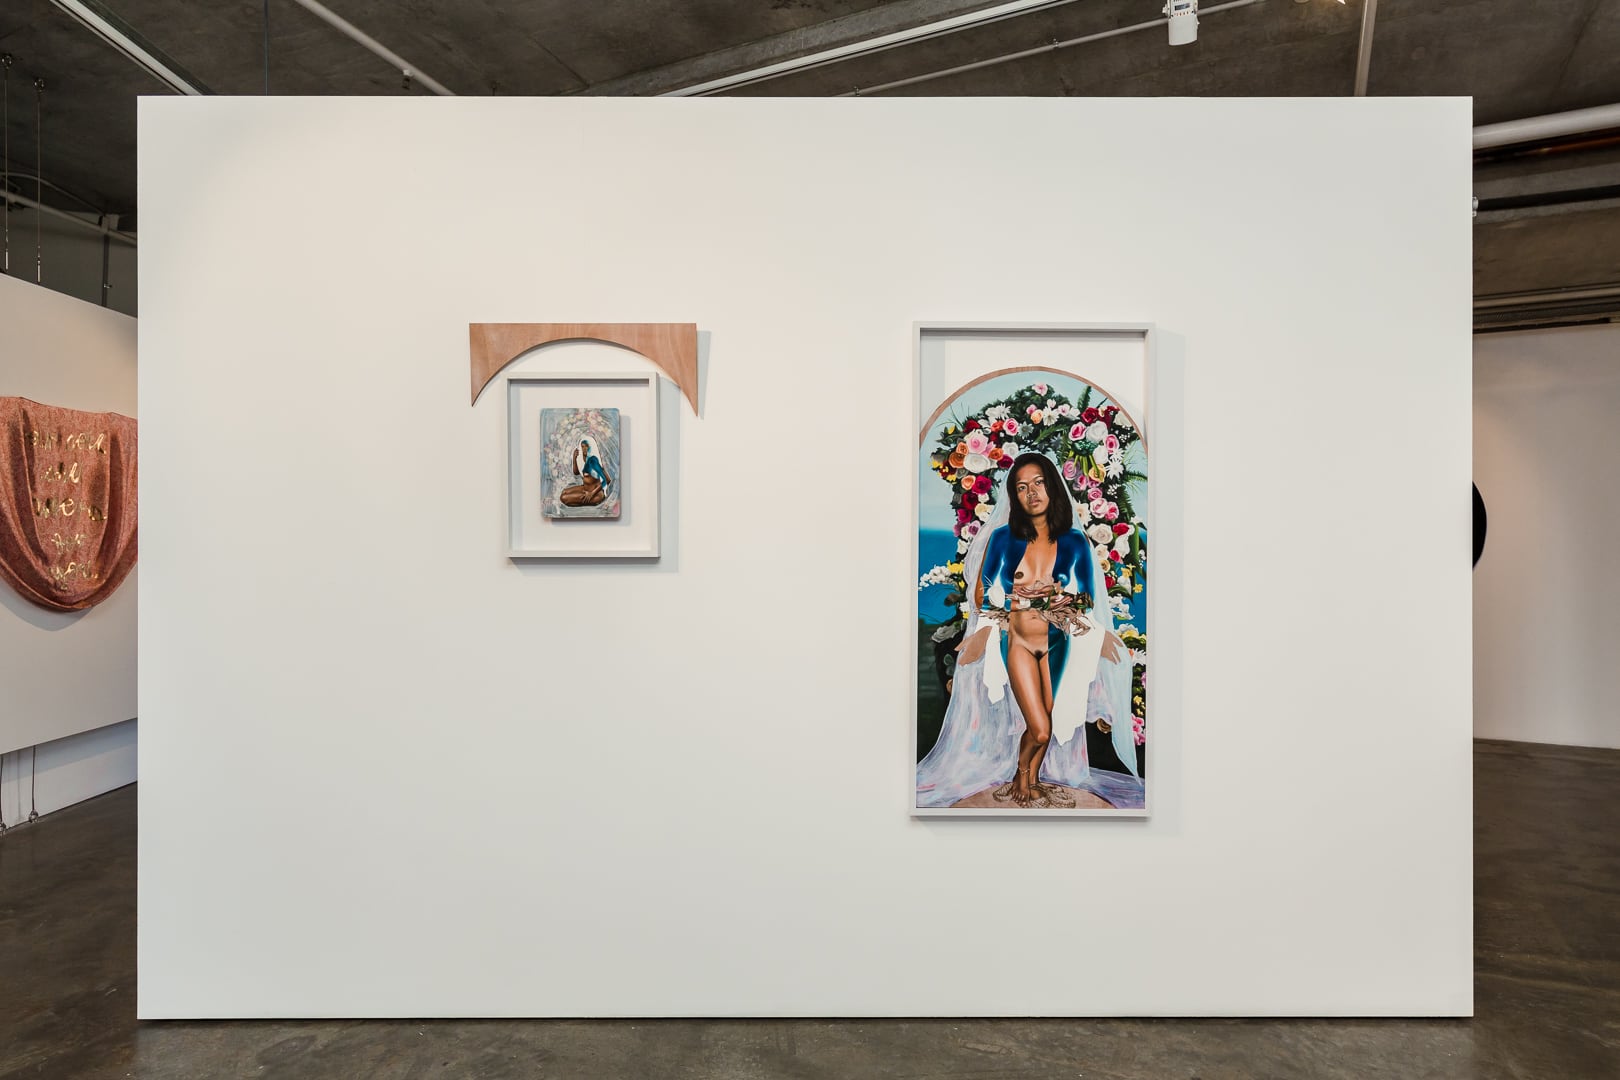 Image 03: L-R Marikit Santiago *Be* 2017, acrylic oil and pyrography on MDF placemat 50x50cm; Marikit Santiago *Blessed Virgin Fierce* 2018, acrylic, oil and pyrography on ply 135x65cm. Image: Document Photography. Courtesy of the artist and Verge Gallery.